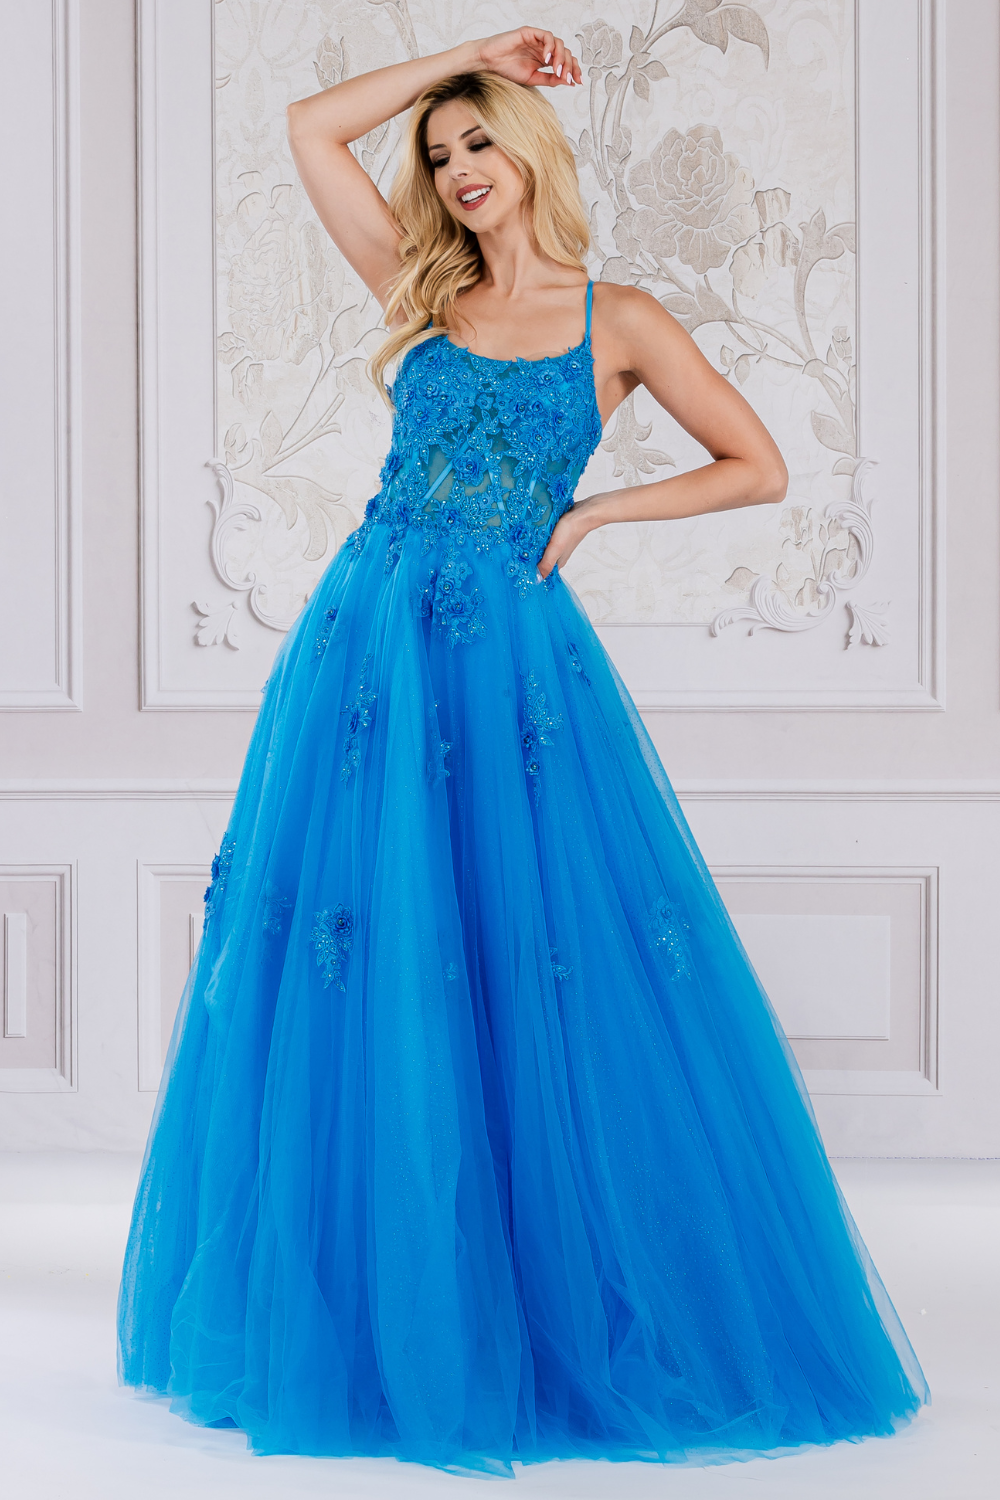 AC 7035 - Beaded Floral Applique A-Line Prom Gown With Sheer Boned